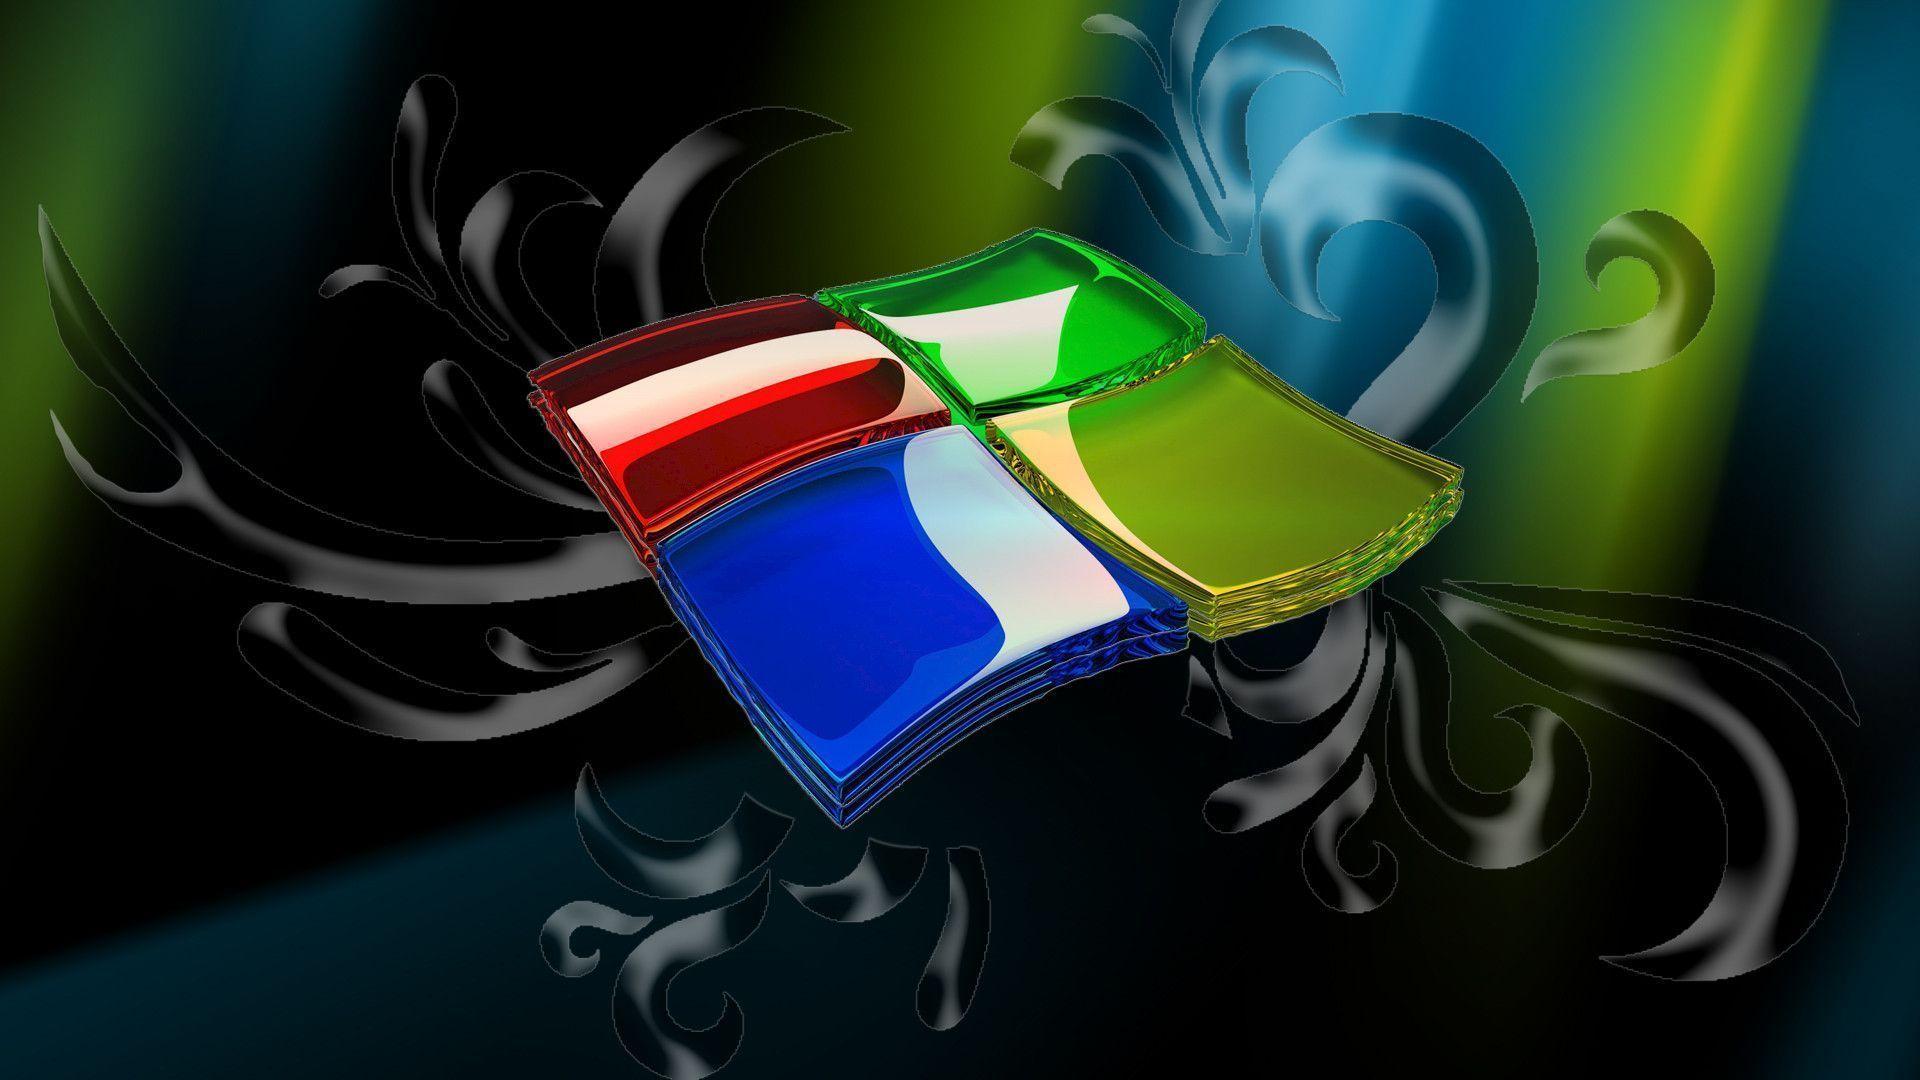 Windows 7 3D wallpapers by Topas2012